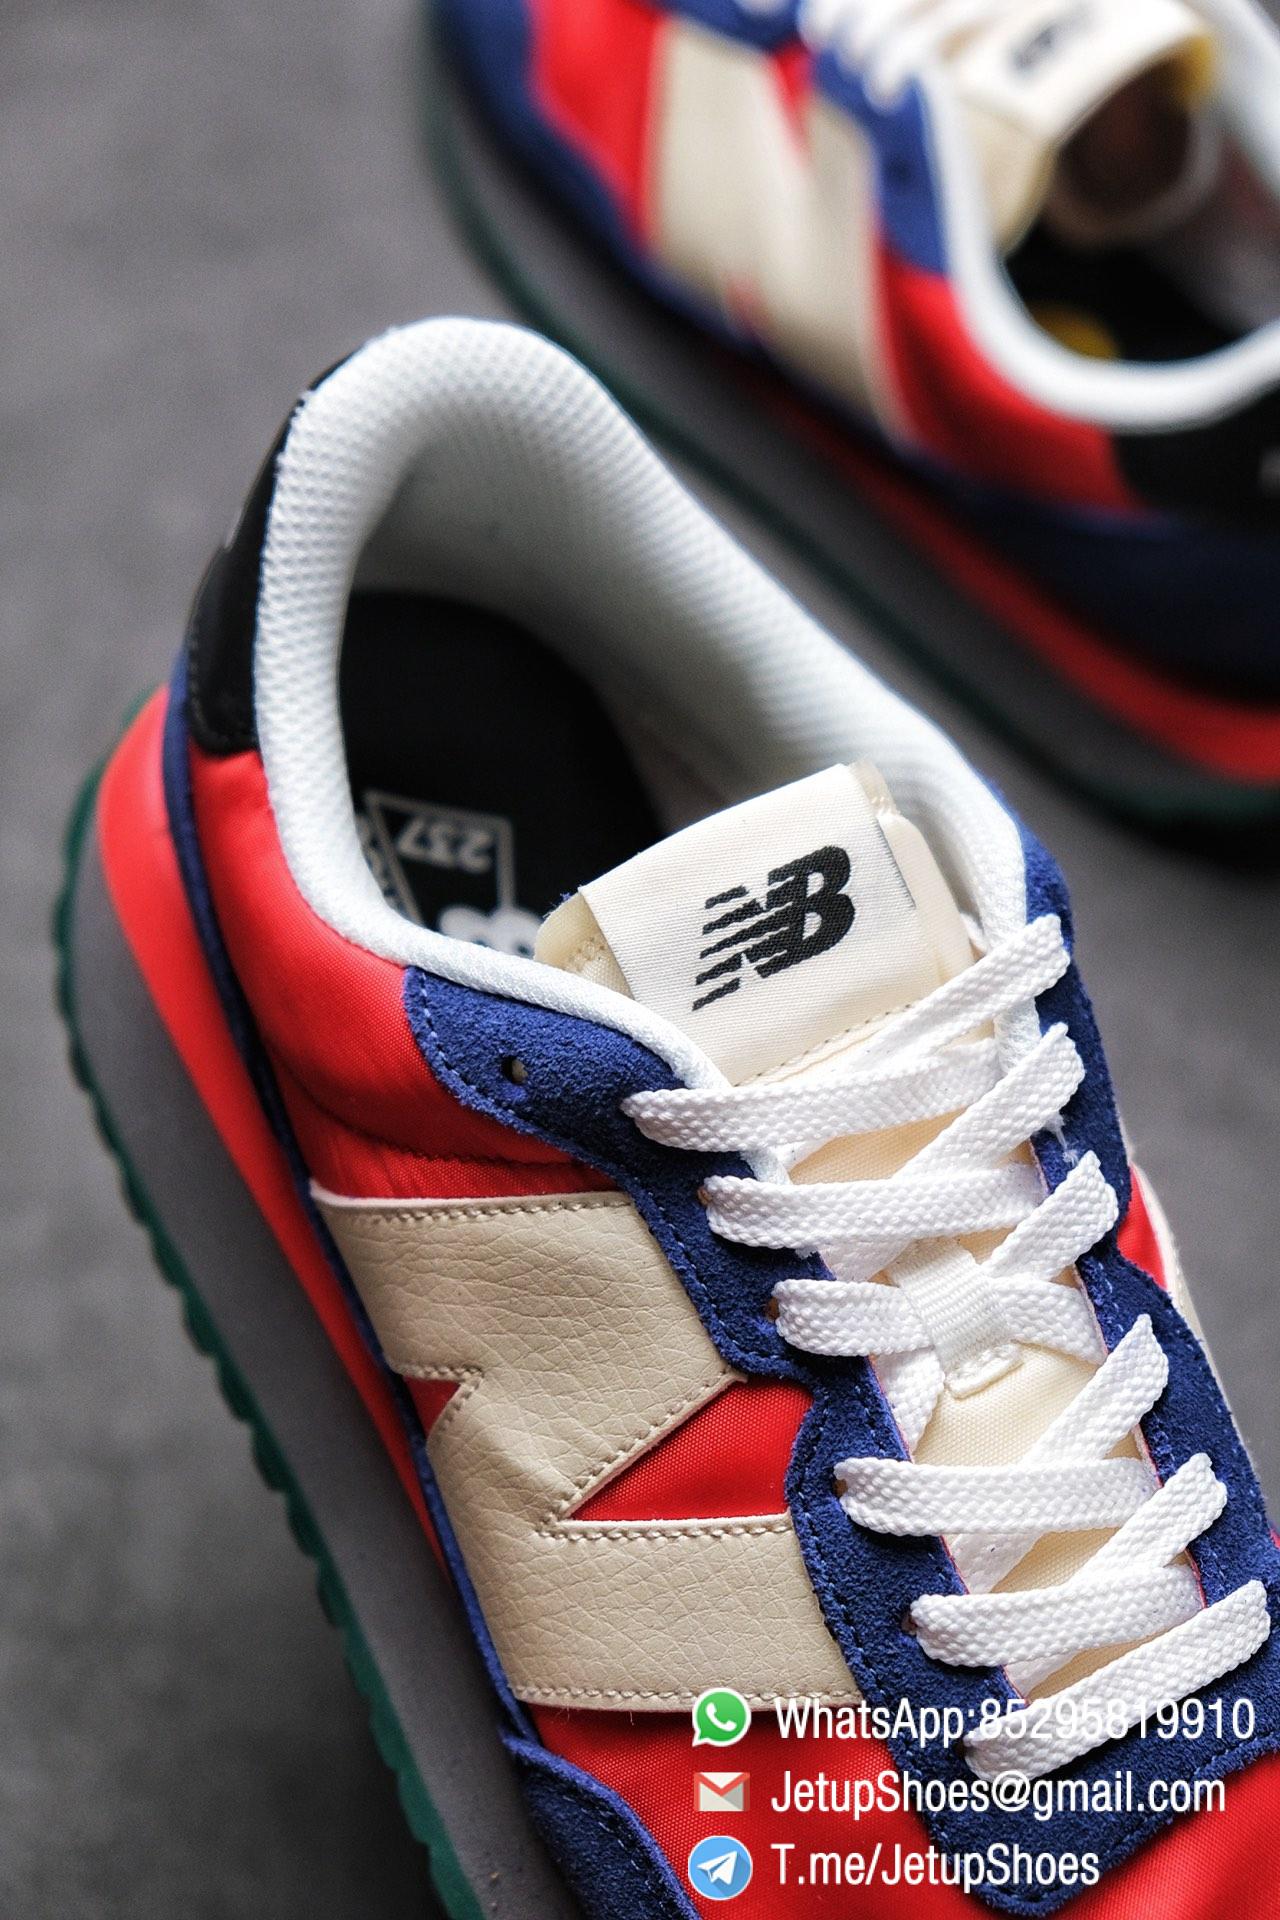 Best Replica New Balance 237 Blue Red SKU MS237LA2 High Quality Fake Sneakers 05 1